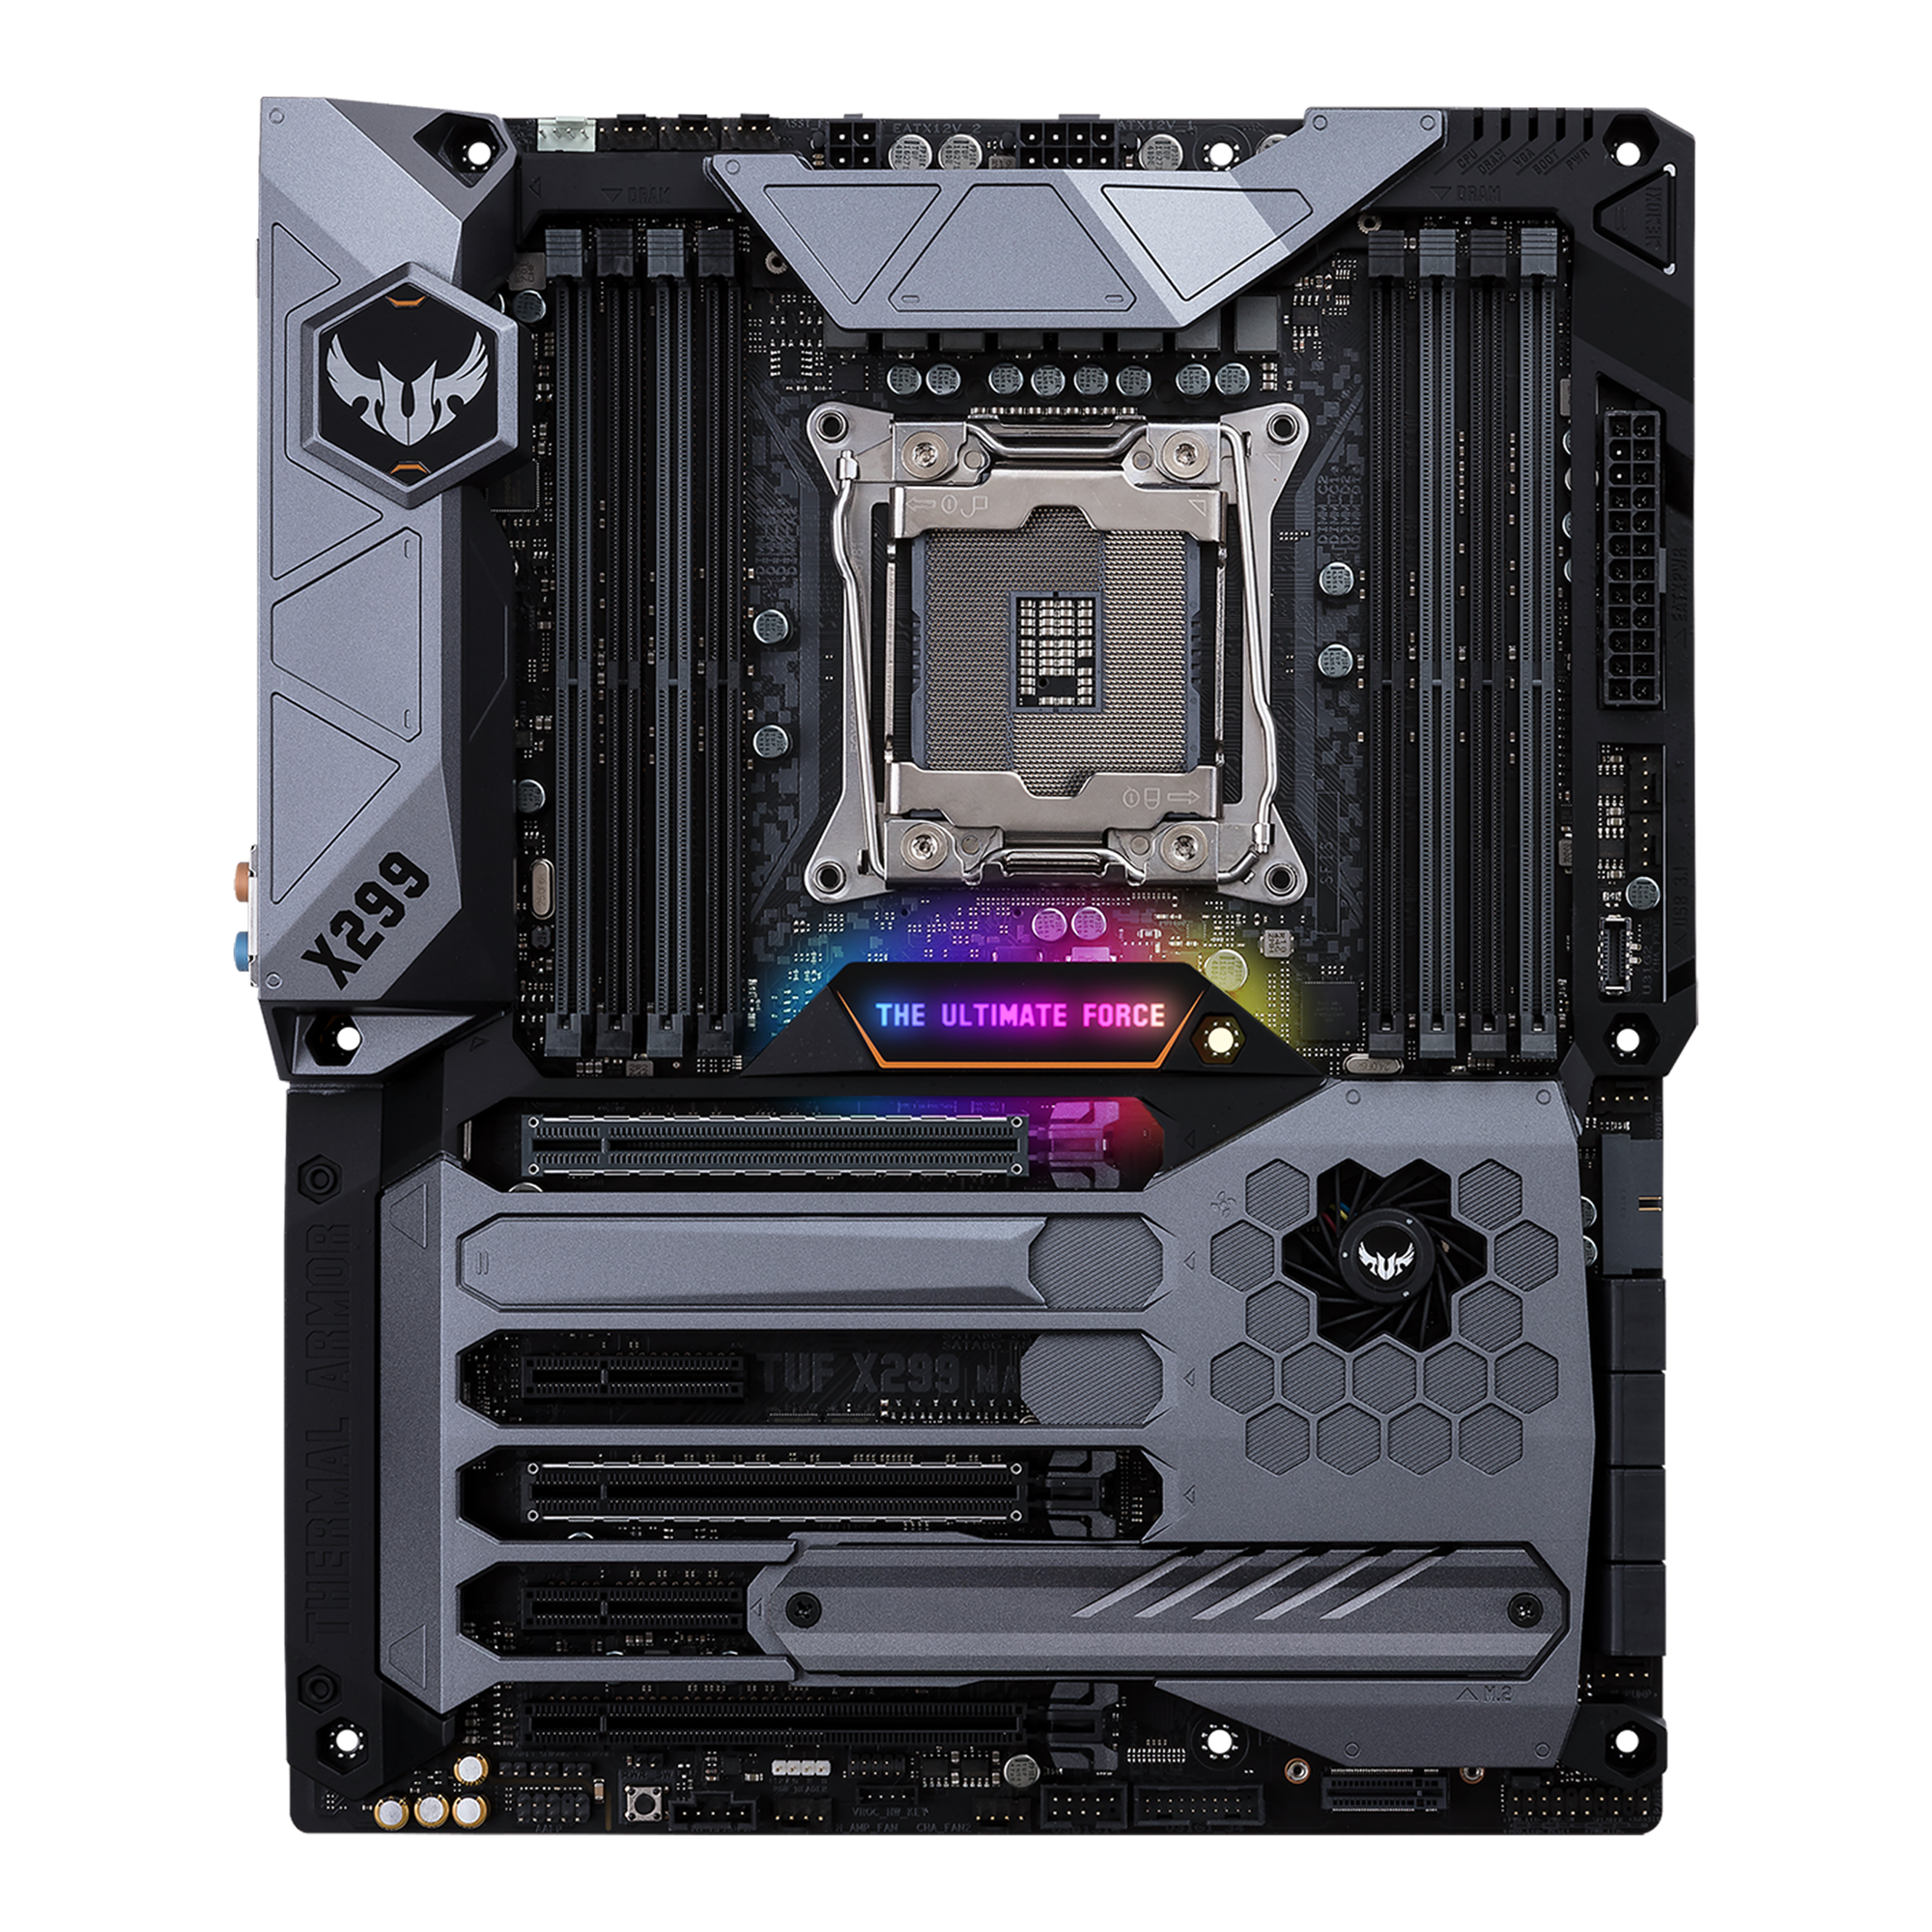 TUF X299 MARK 1｜Motherboards｜ASUS USA